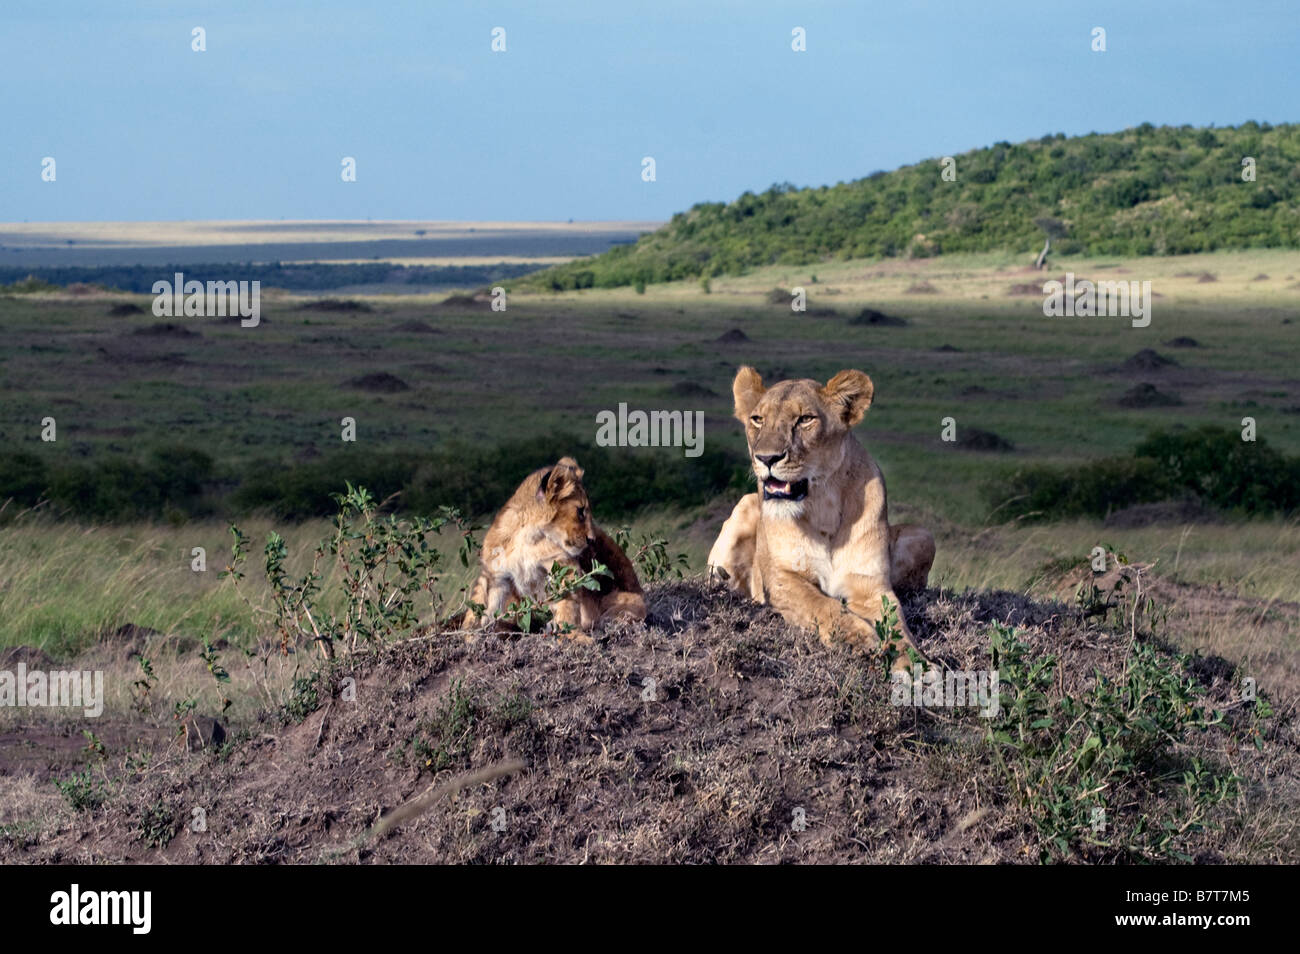 African lioness with cub resting Stock Photo